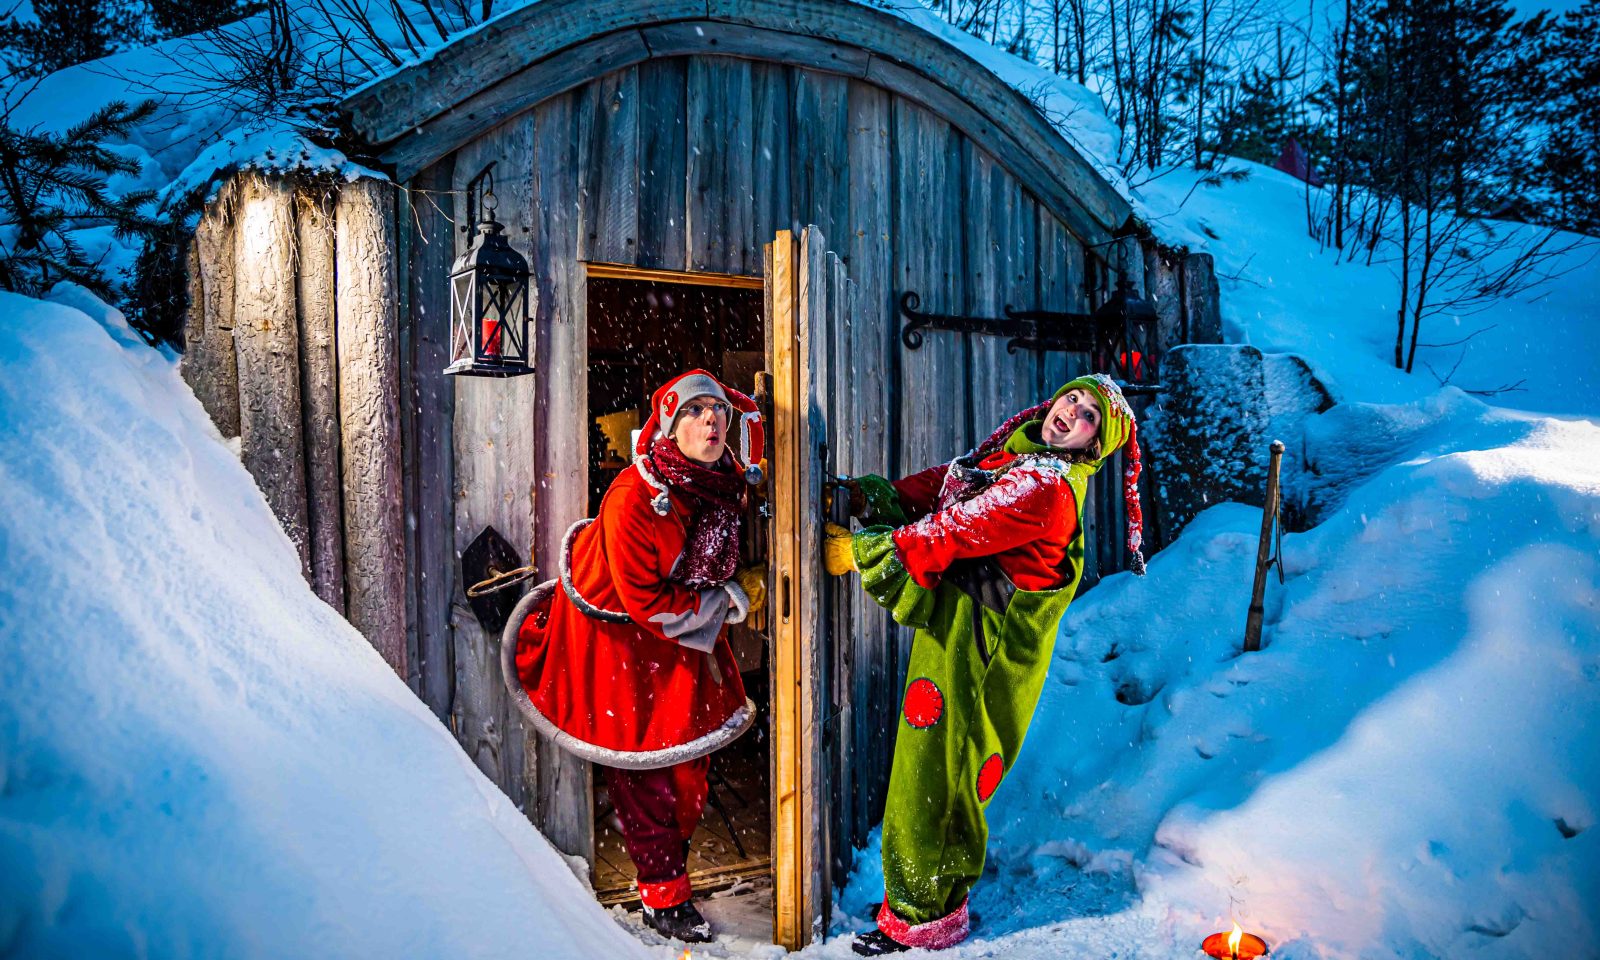 Elves at the command center in Santa Claus Secret Forest - Joulukka